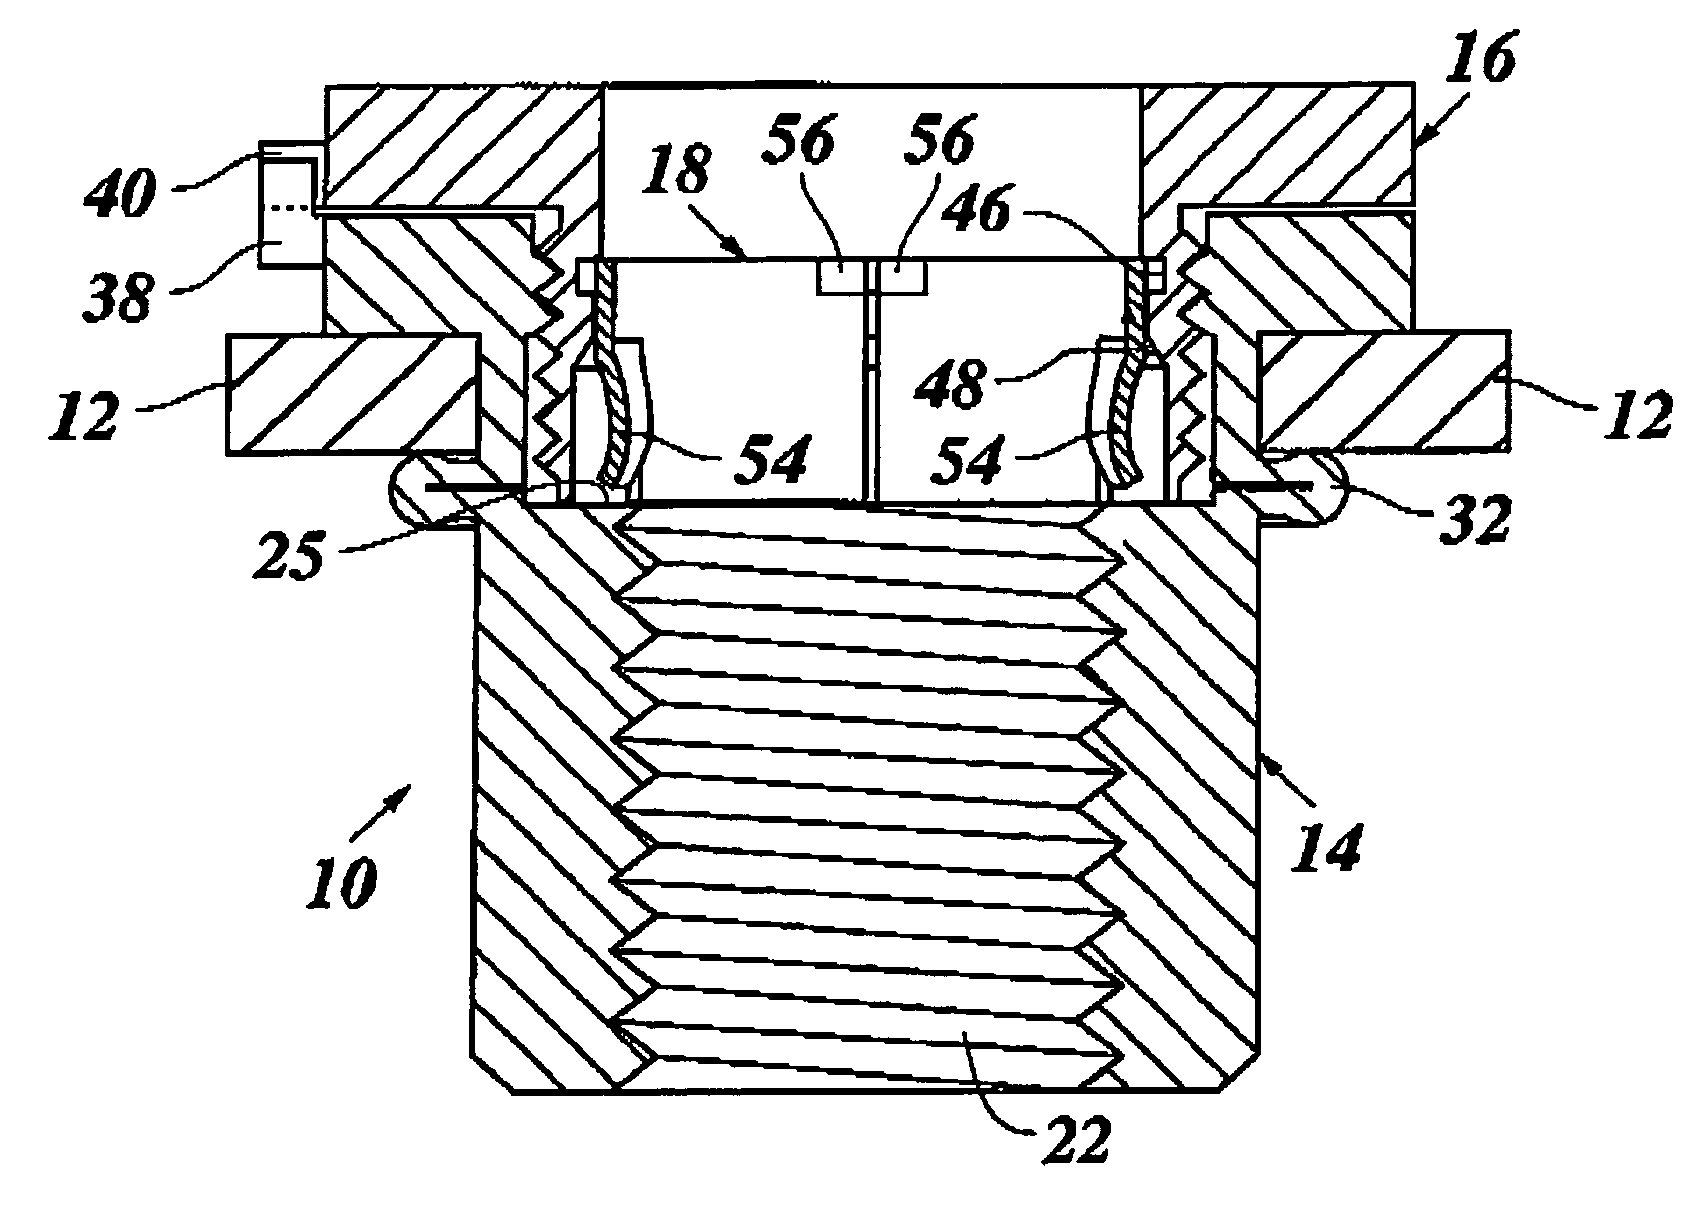 Device for connecting component parts, comprising a blind rivet fastener